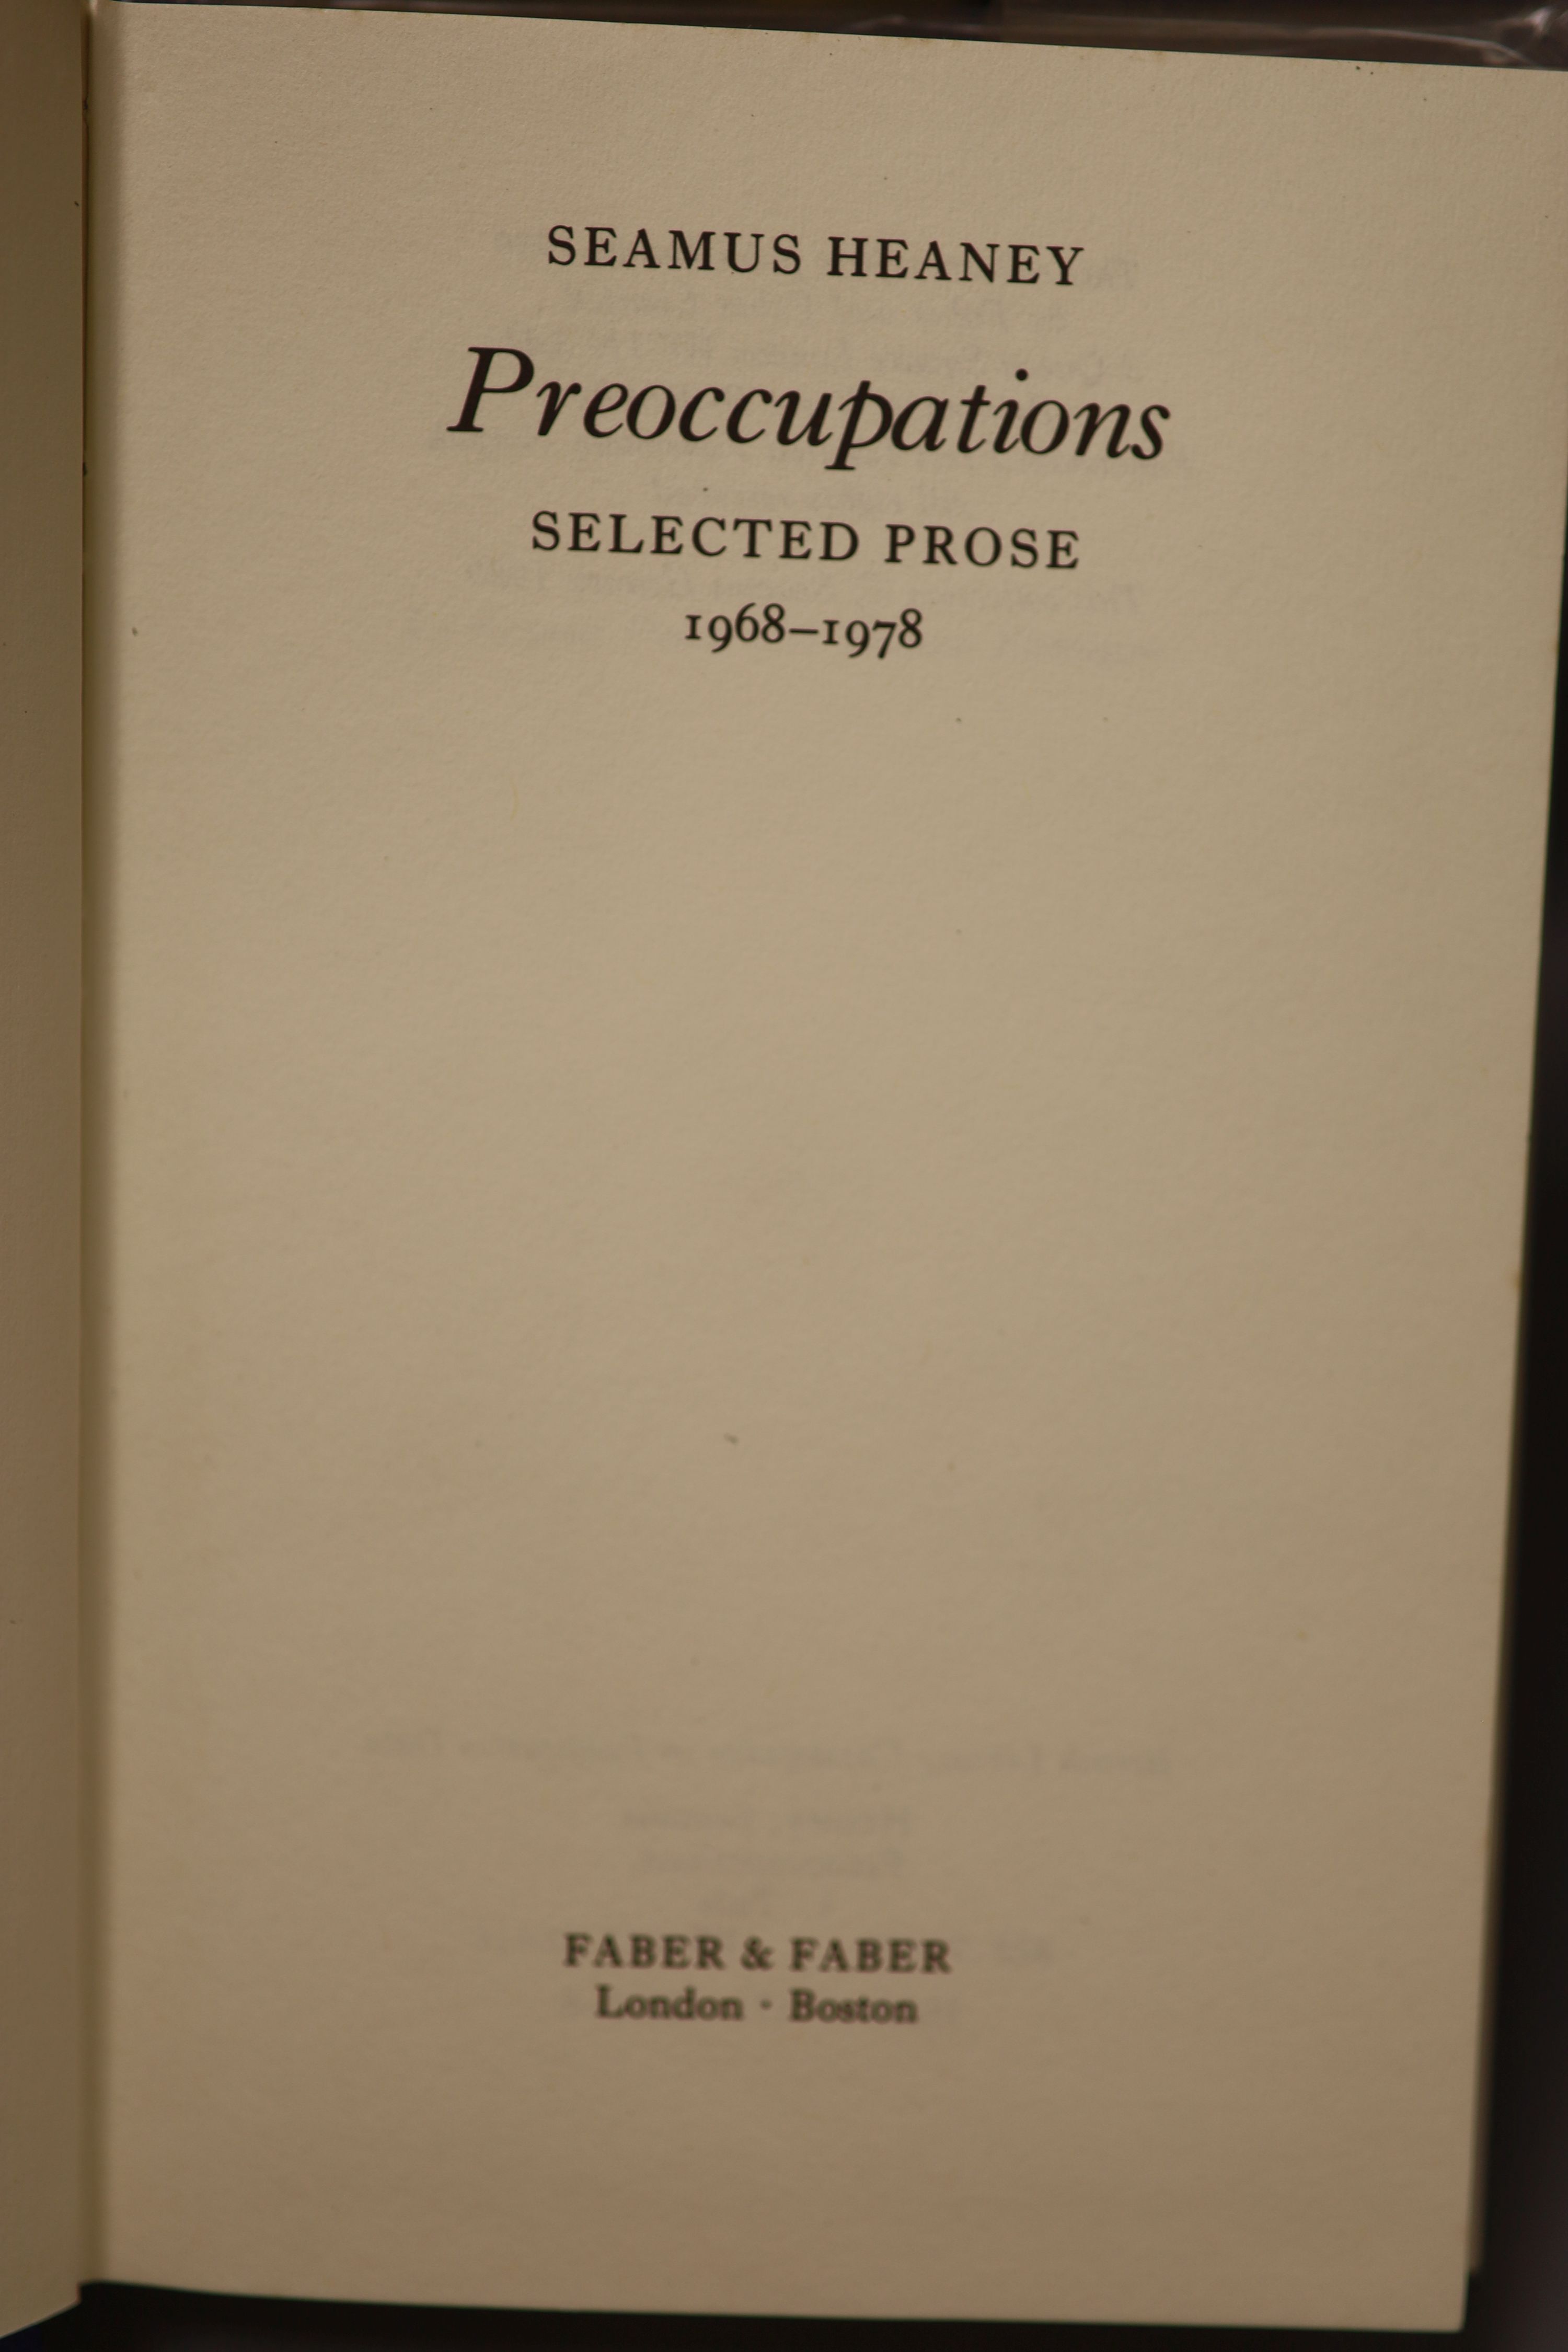 Heaney, Seamus. The Midnight Verdict. First Edition. d/wrapper. 1993; Preoccupations: selected prose, 1968-1978. d/wrapper. 1980; with seven others by this author